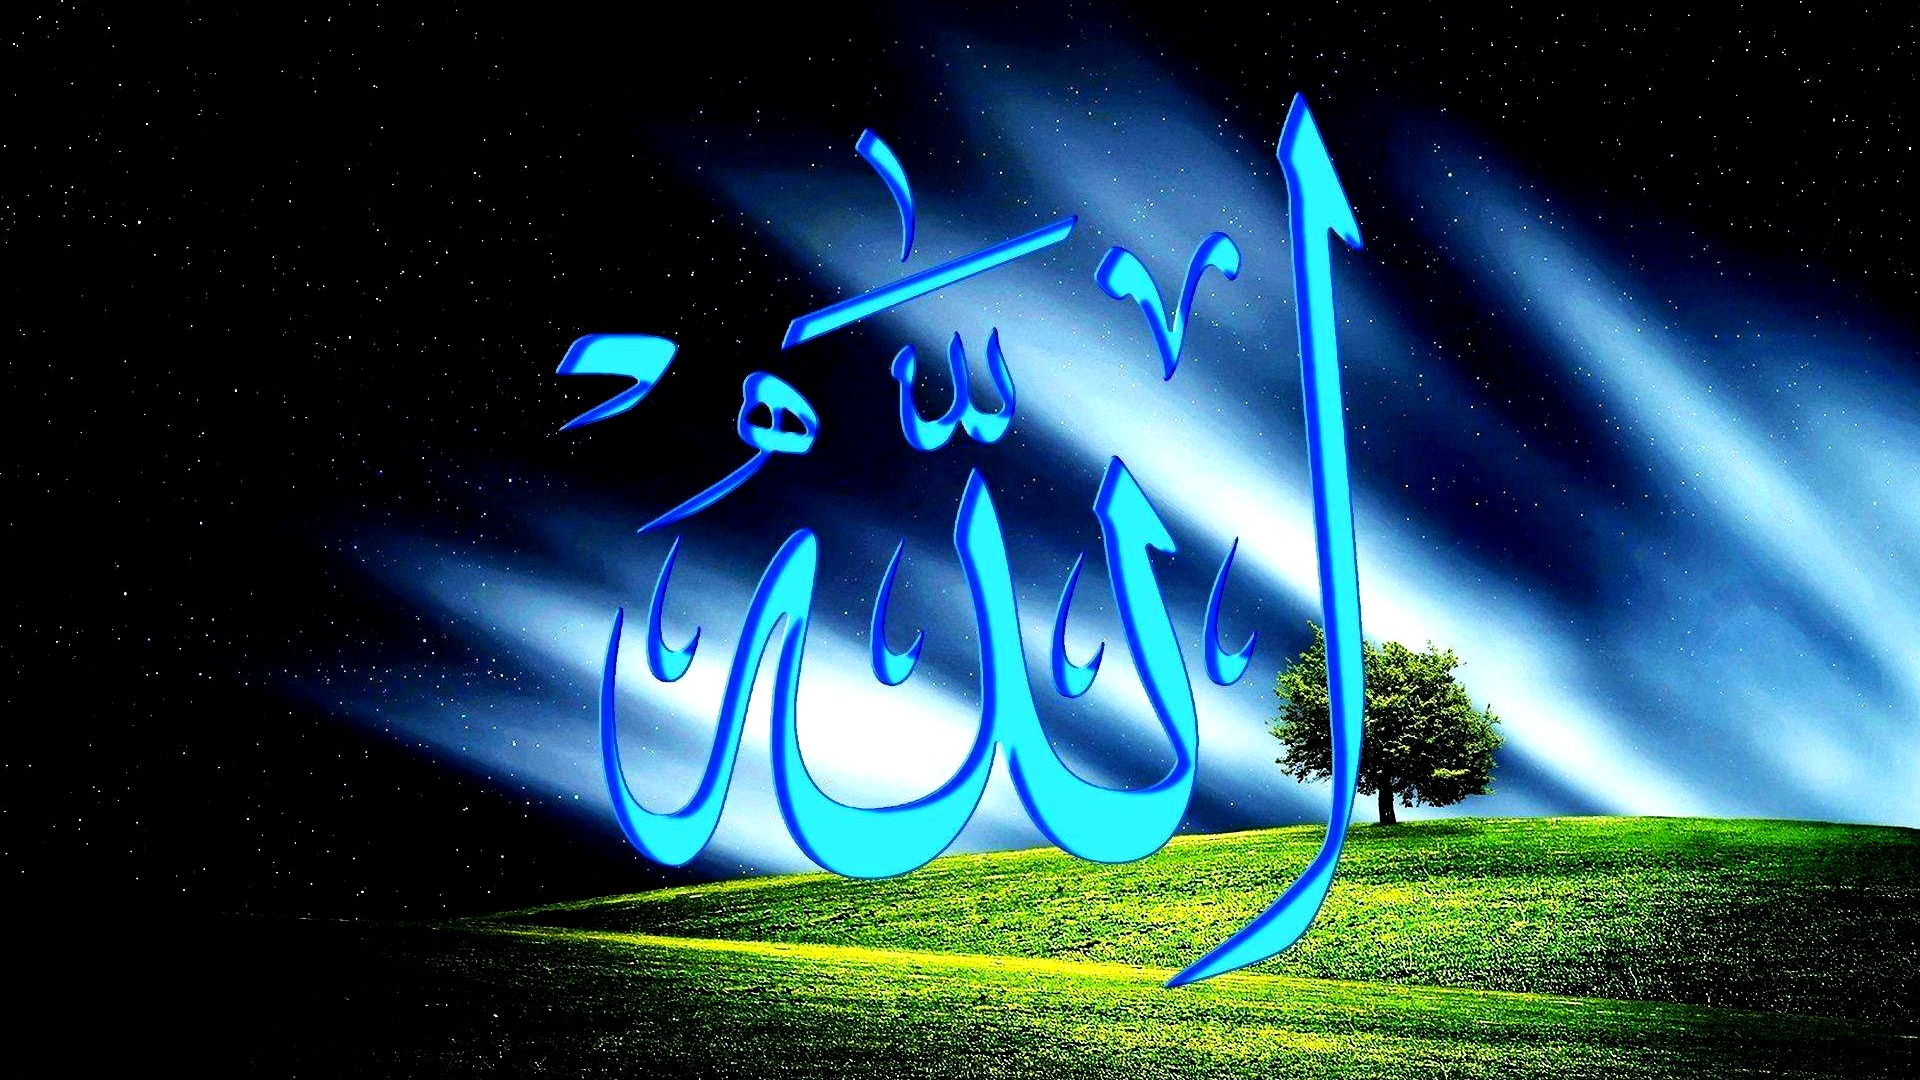 Allah Wallpaper For Desktop with high-resolution 1920x1080 pixel. You can use and set as wallpaper for Notebook Screensavers, Mac Wallpapers, Mobile Home Screen, iPhone or Android Phones Lock Screen